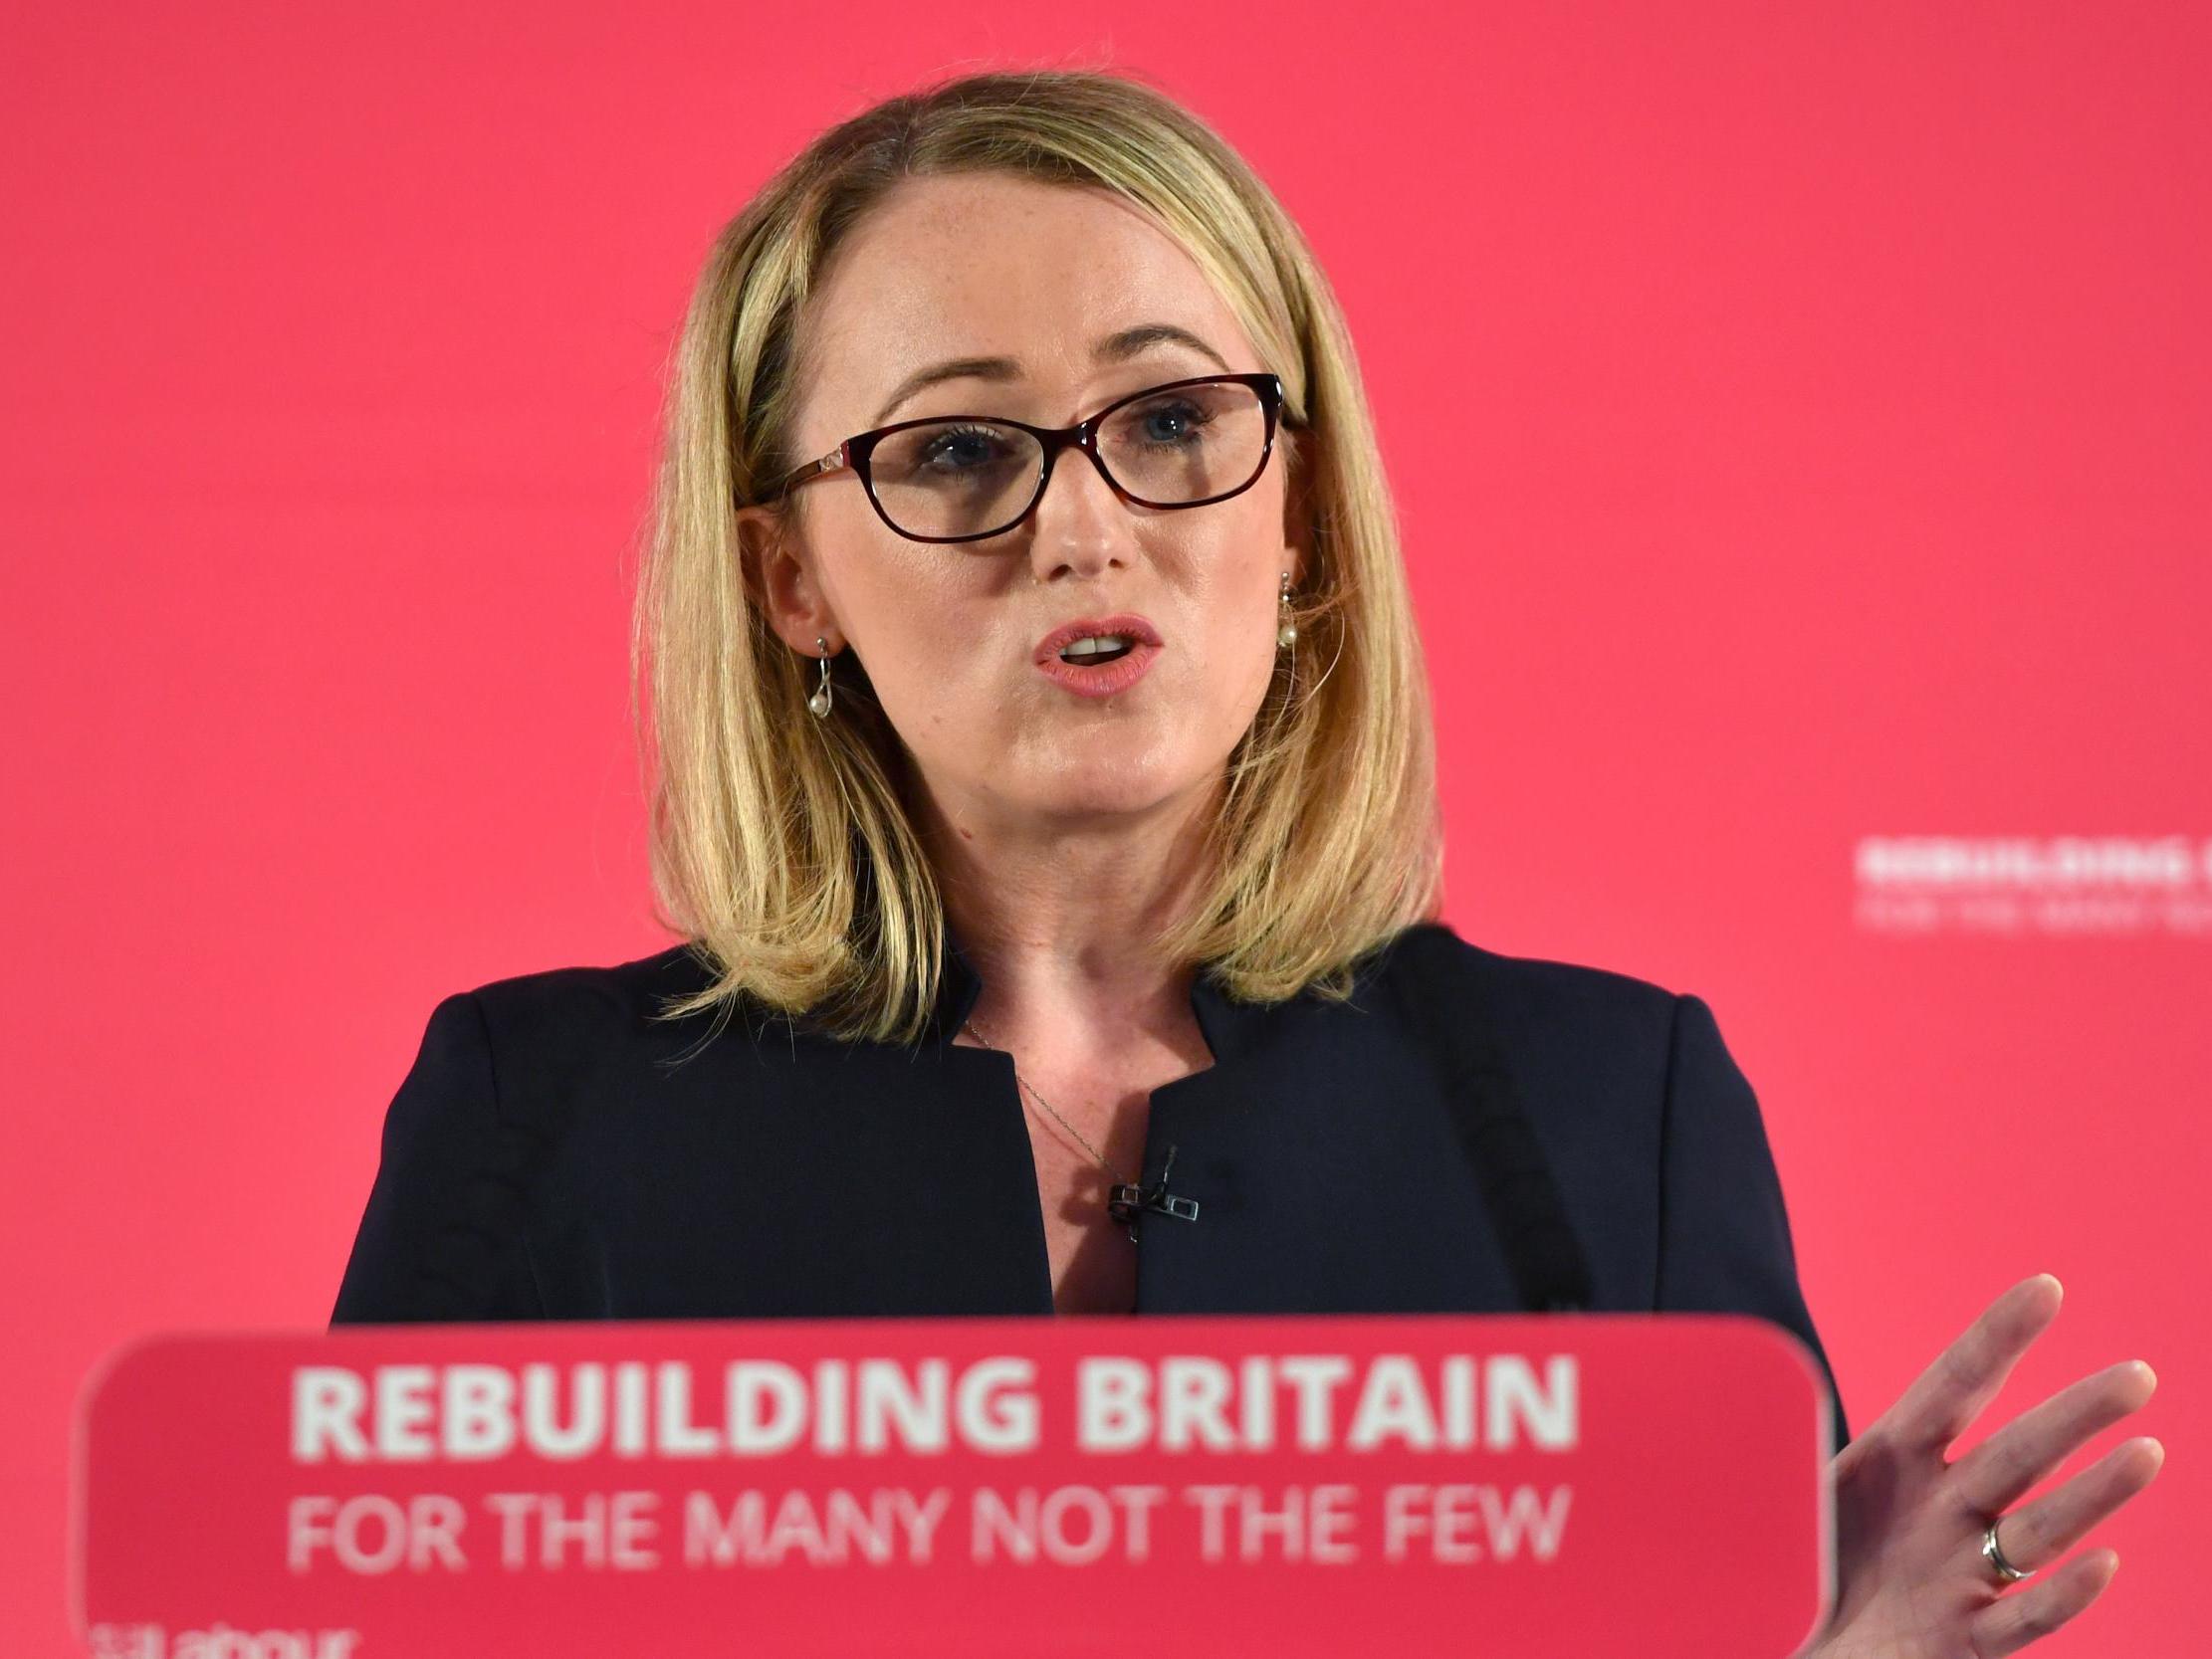 Labour leadership: Rebecca Long-Bailey confirms her name is hyphenated